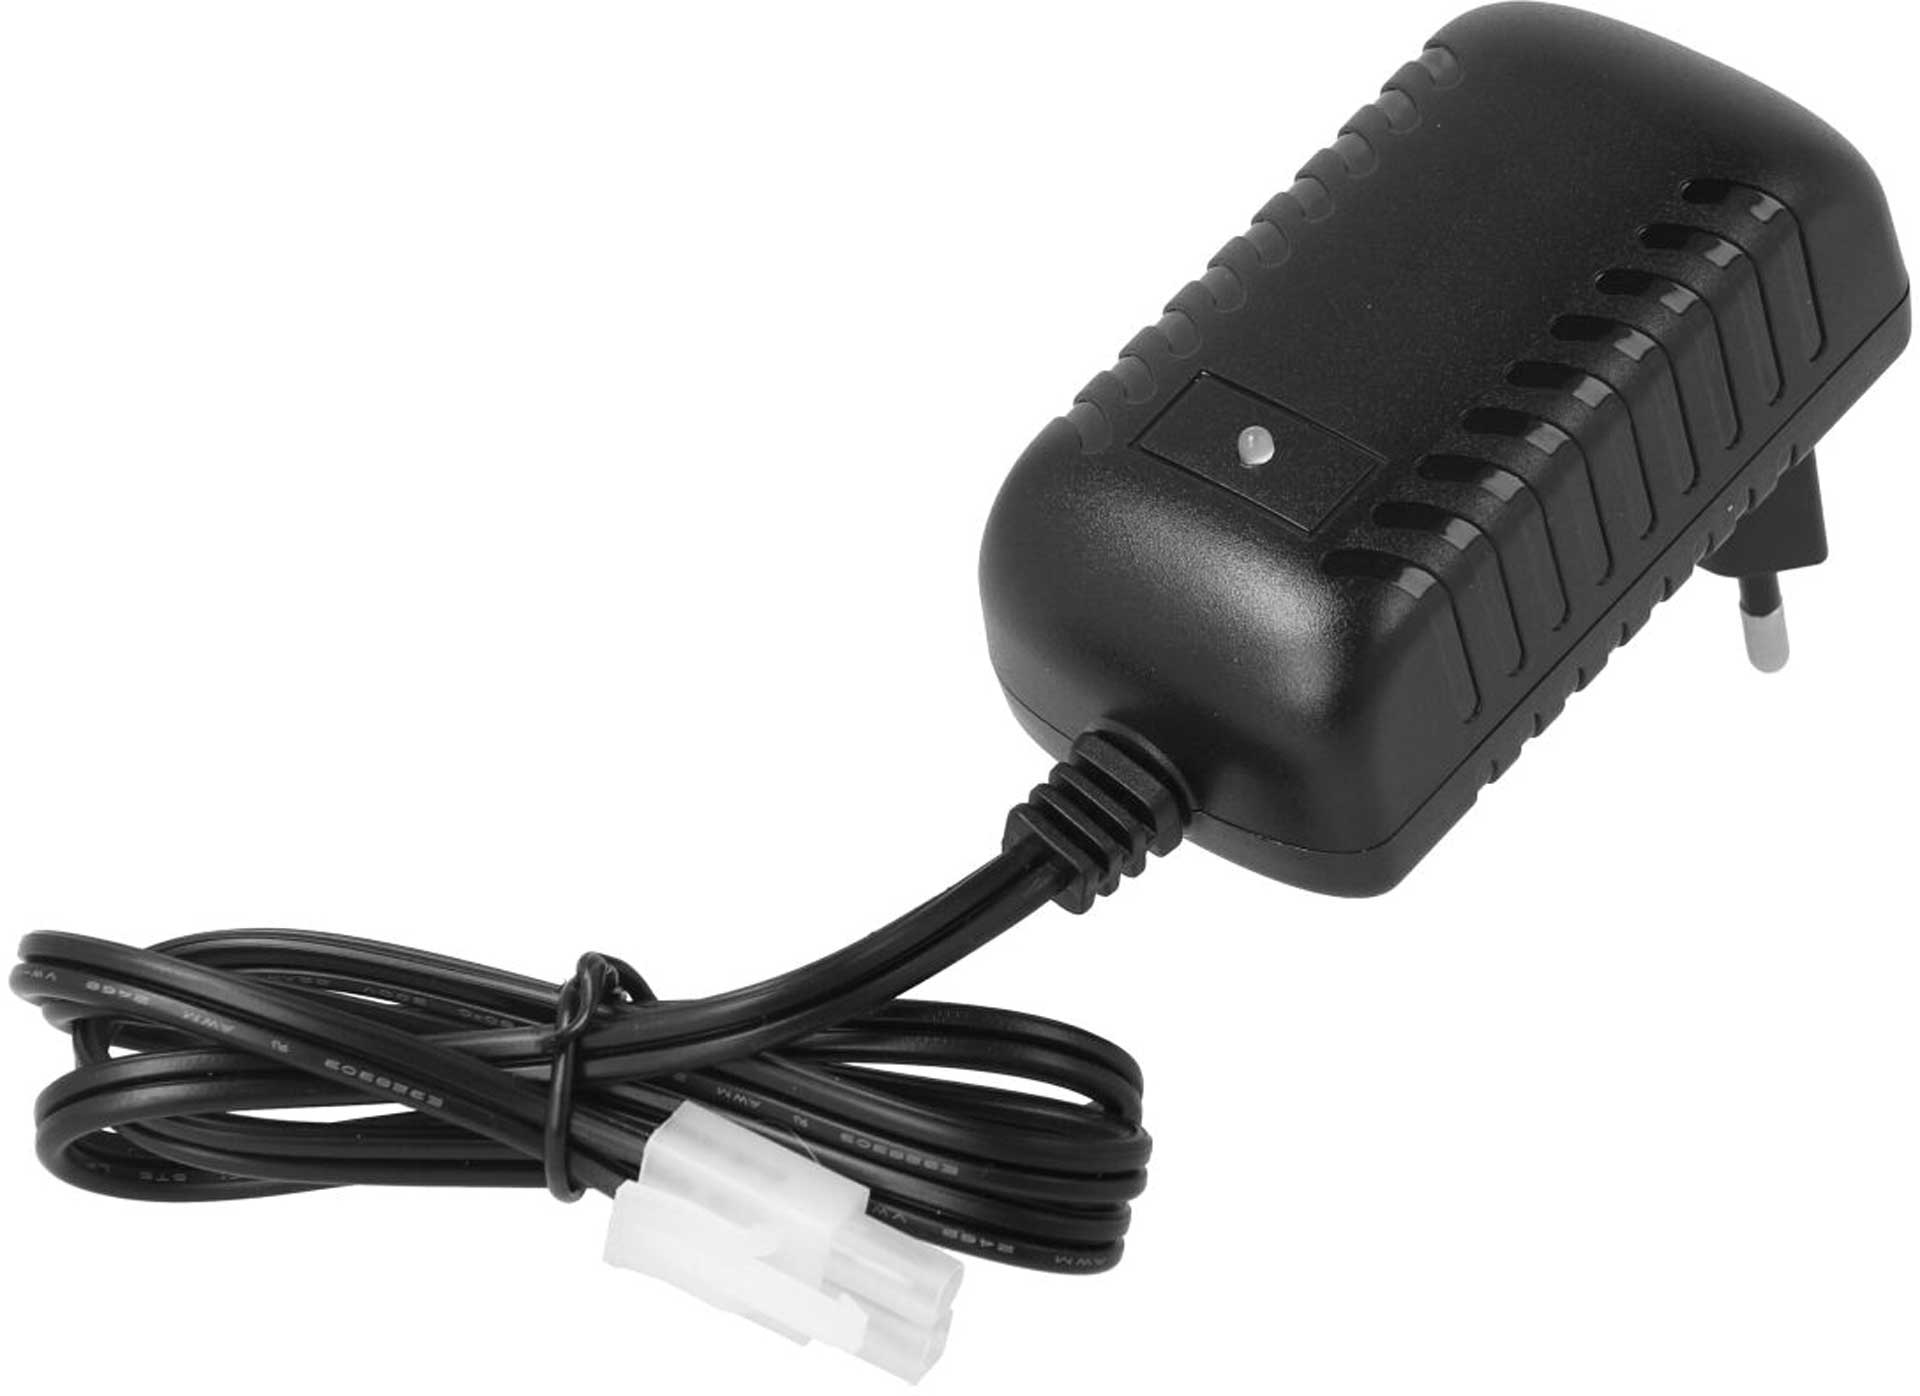 ROBITRONIC Peak charger NiMh 4-8 cells 1A Plug-in charger